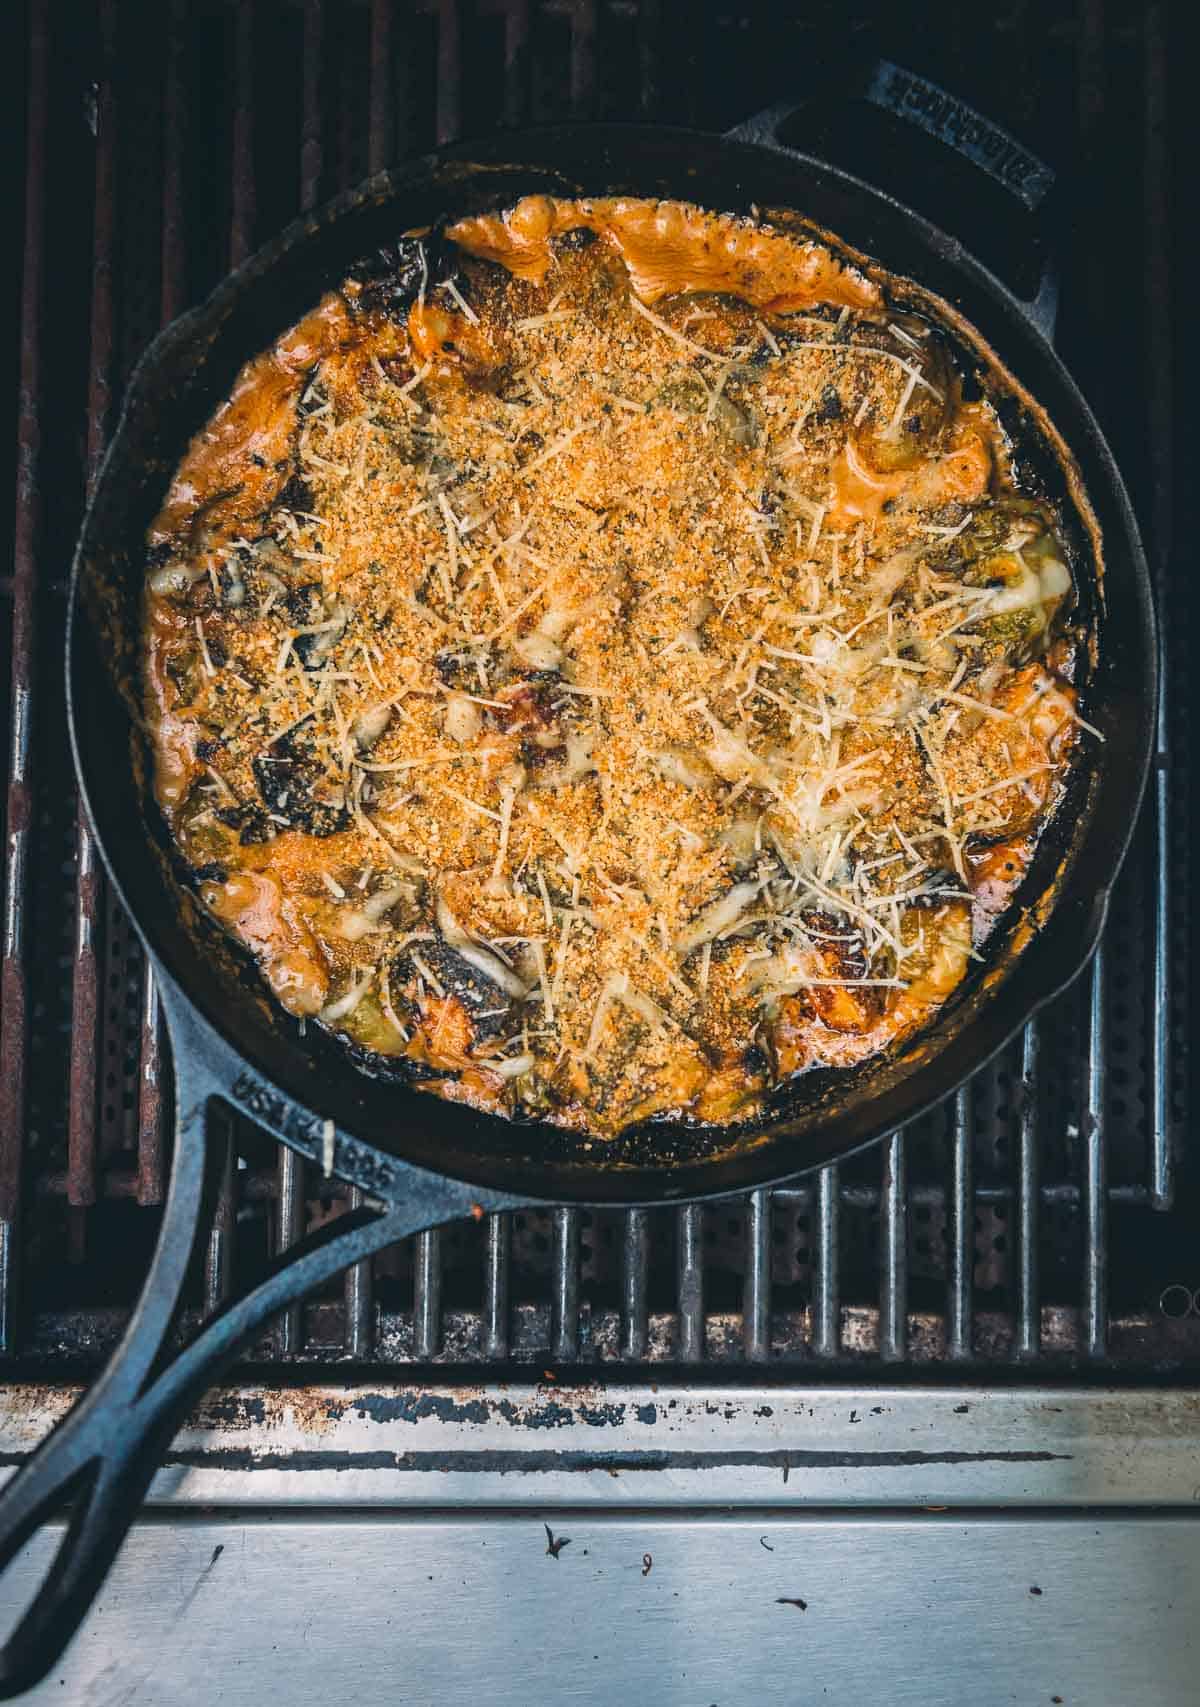 A skillet full of food on a grill.